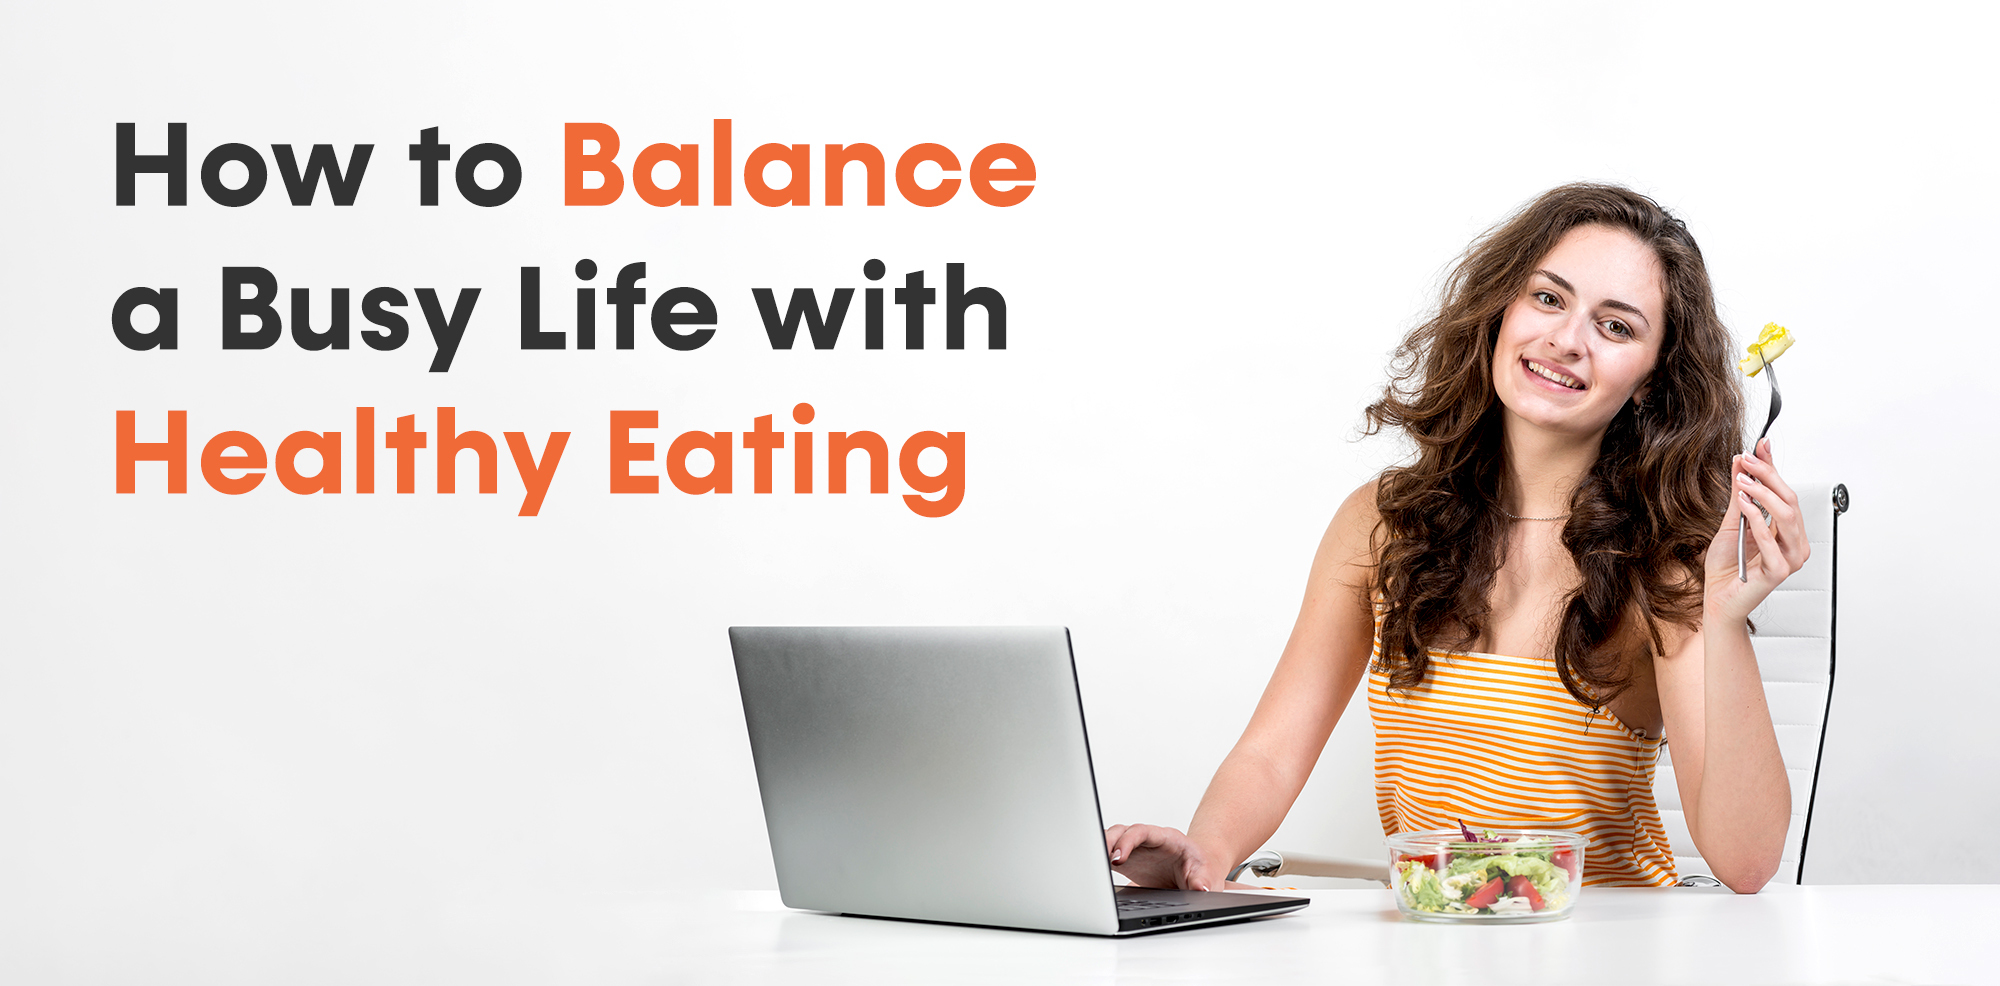 How to Balance a Busy Life with Healthy Eating